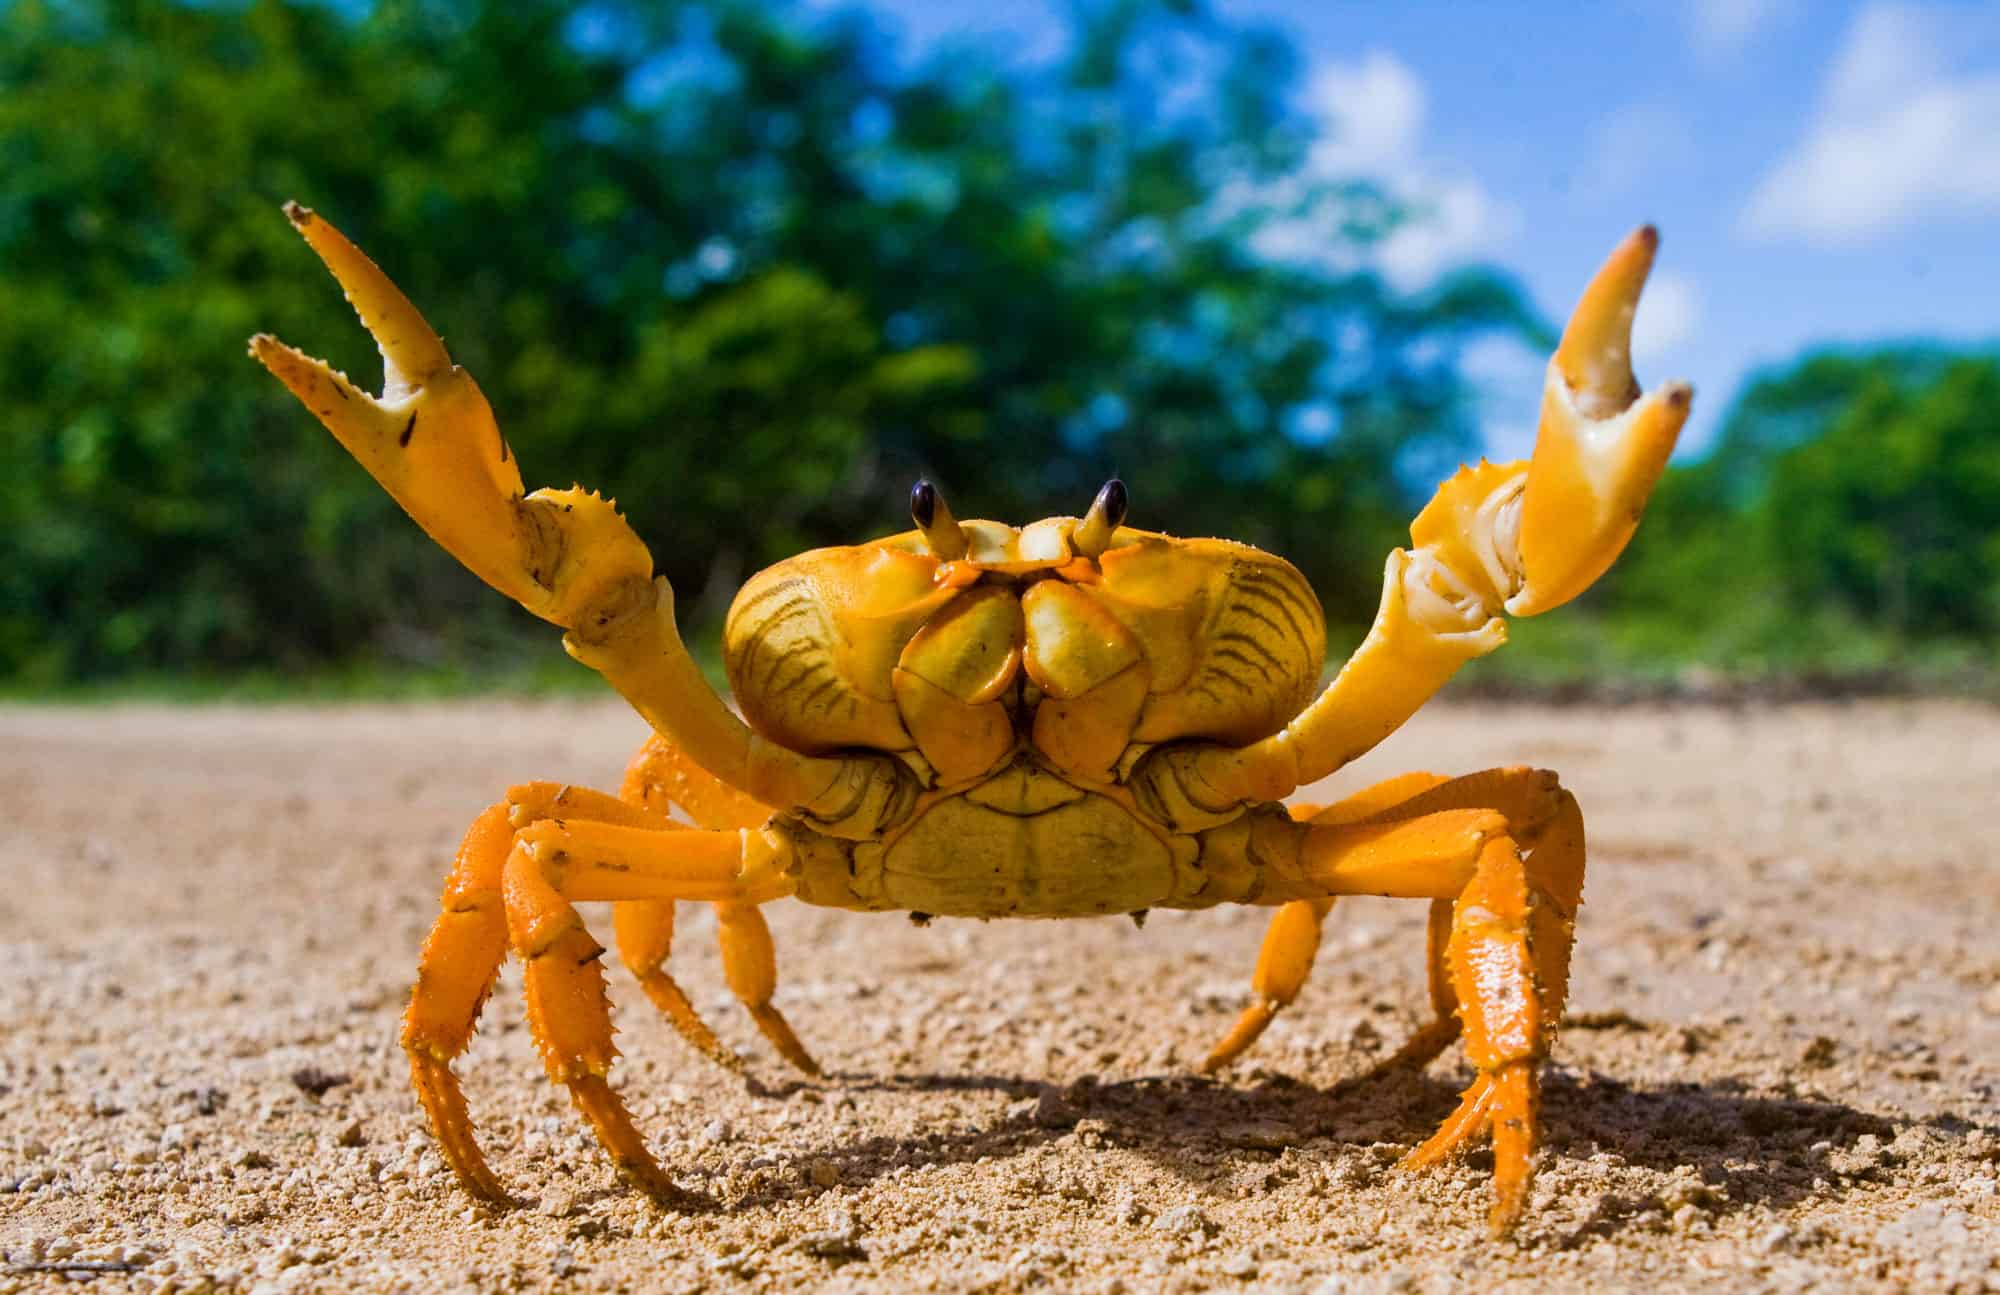 How Many Legs Do Crabs Have? 14 Interesting Facts About Crabs - AZ Animals